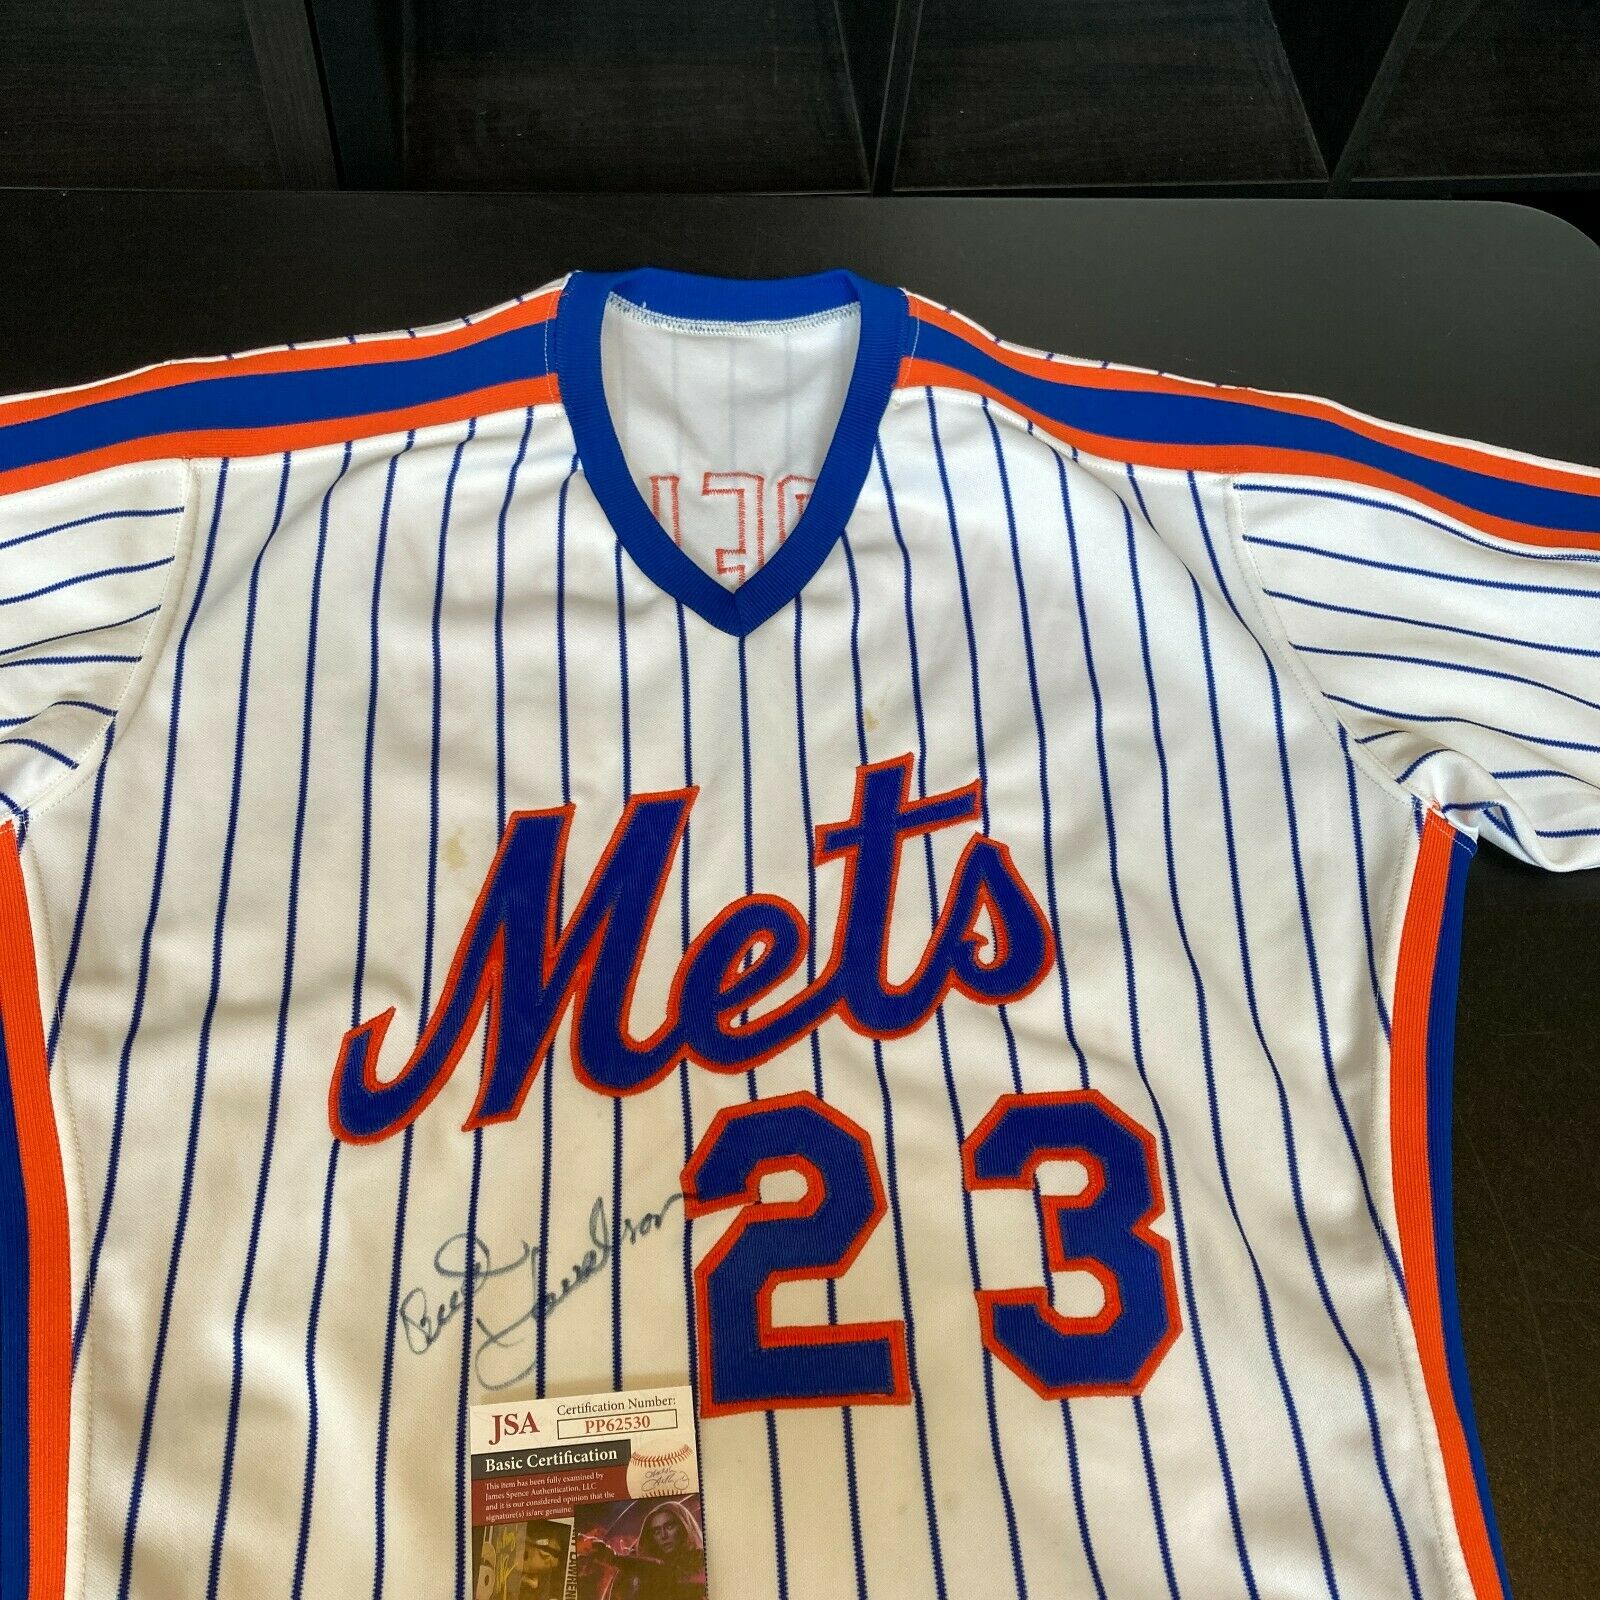 1987 Bud Harrelson New York Mets Game Used and Signed Home Jersey